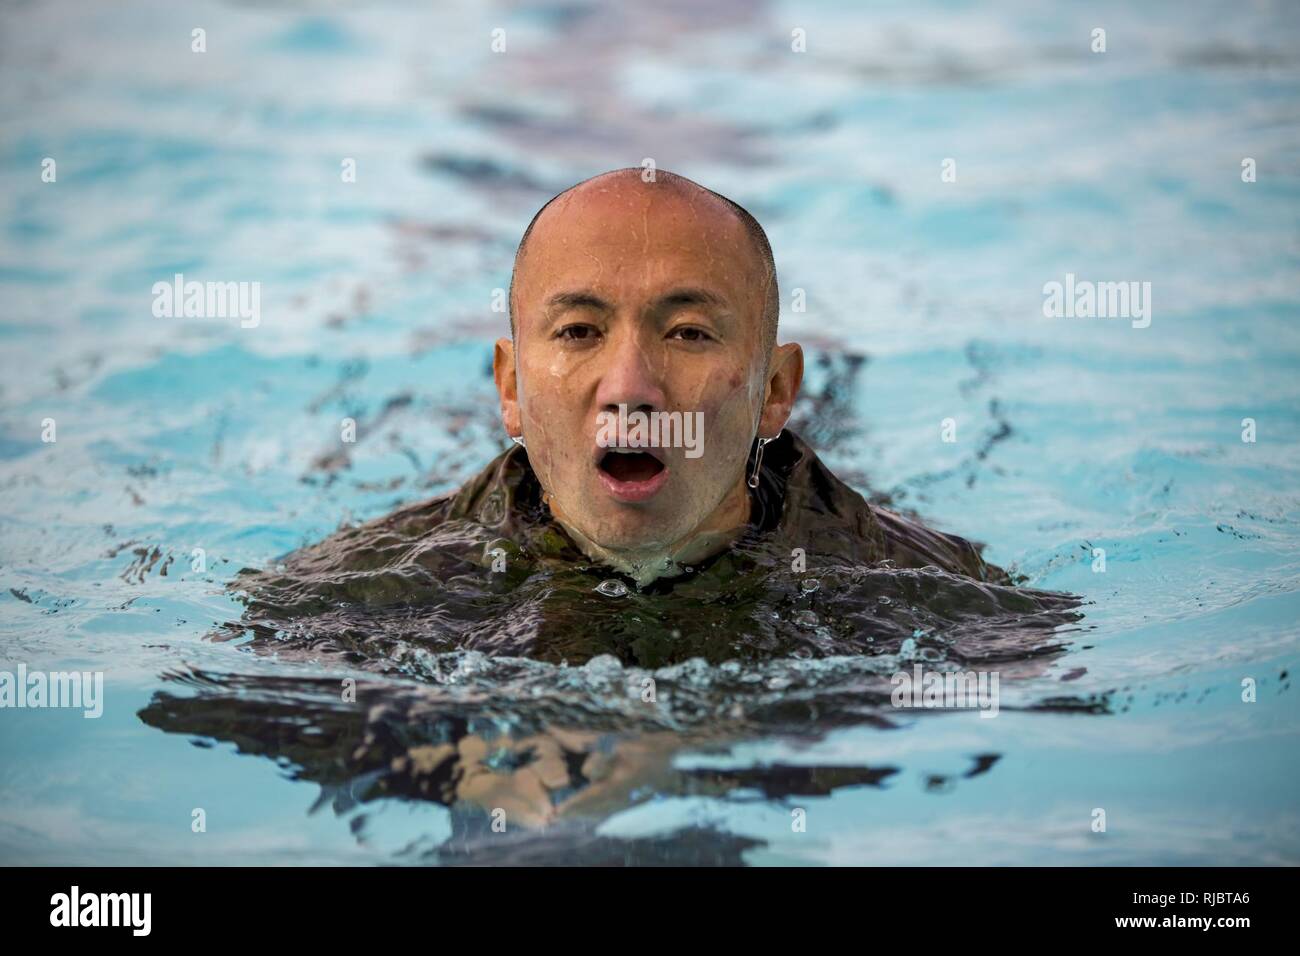 MARINE CORPS BASE CAMP PENDLETON, California – A Japan Ground Self Defense Force soldier participates in a Marine Corps intermediate swim qualification as part of exercise Iron Fist Jan. 16, 2018. Iron Fist brings together U.S. Marines from the 11th Marine Expeditionary Unit and Soldiers from the Japan Ground Self Defense Force, Western Army Infantry Regiment, to improve bilateral planning, communicating, and conduct combined amphibious operations. Stock Photo